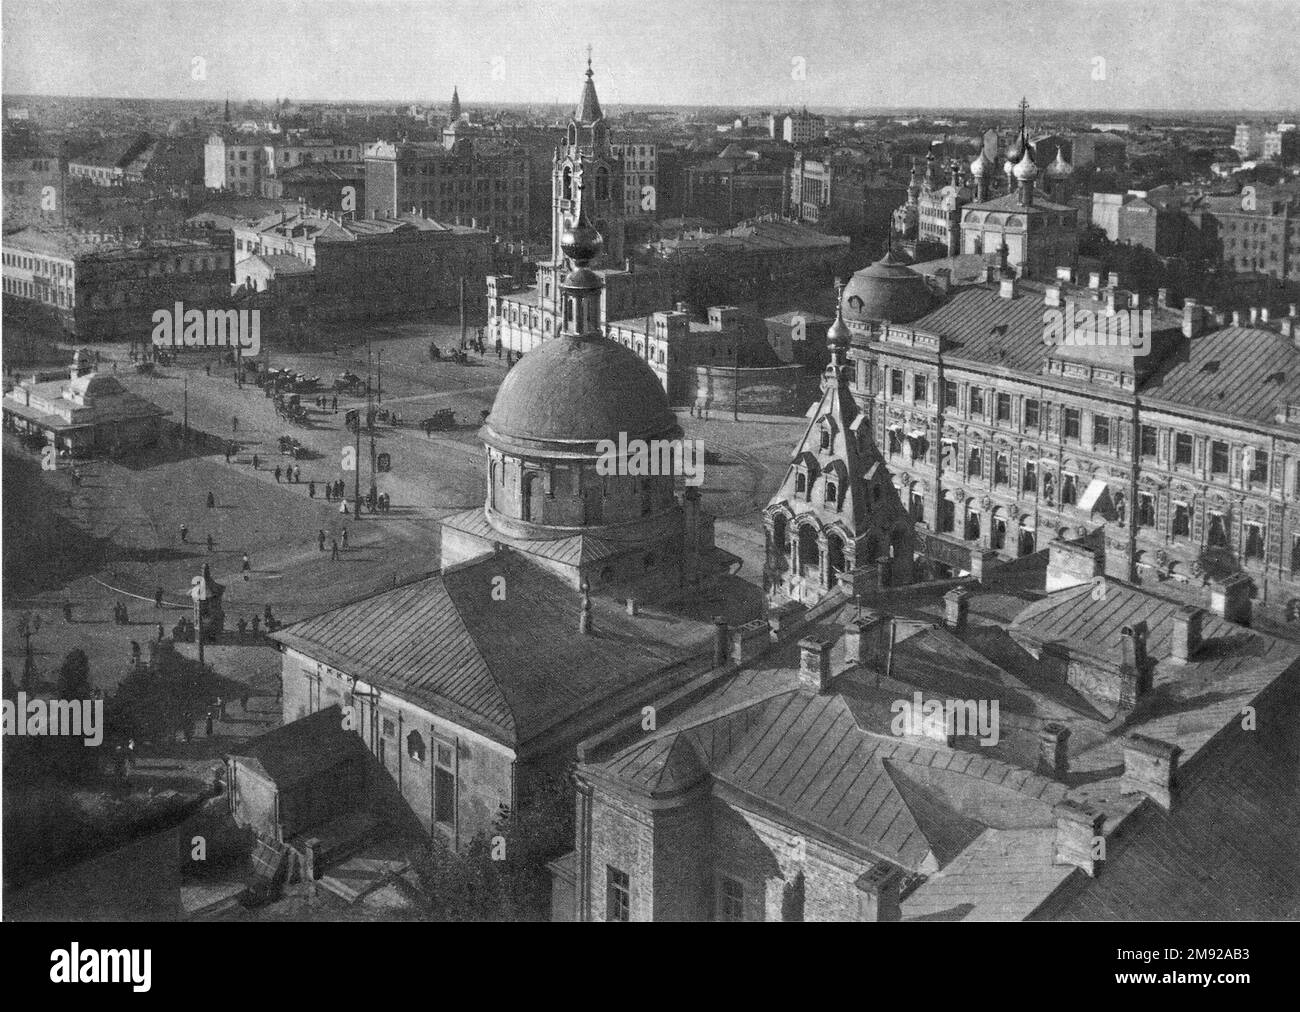 Strastnaya Square with its surroundings. In the foreground is the Church of Dmitry Thessalonica at the corner of Tverskaya and Tverskoy Boulevard. Behind it, on the square - the Passion Monastery; To the left of his cathedral is the Church of the Nativity in Putinki on Malaya Dmitrovka, and further along this street is the Merchant Club. In the depths at the left edge, the high hipped roofs of the Loan Treasury building in Nastasinsky Lane have already risen; it was built in 1915-1916, which helps to date the shooting. ca.  between 1915 and 1916 Stock Photo